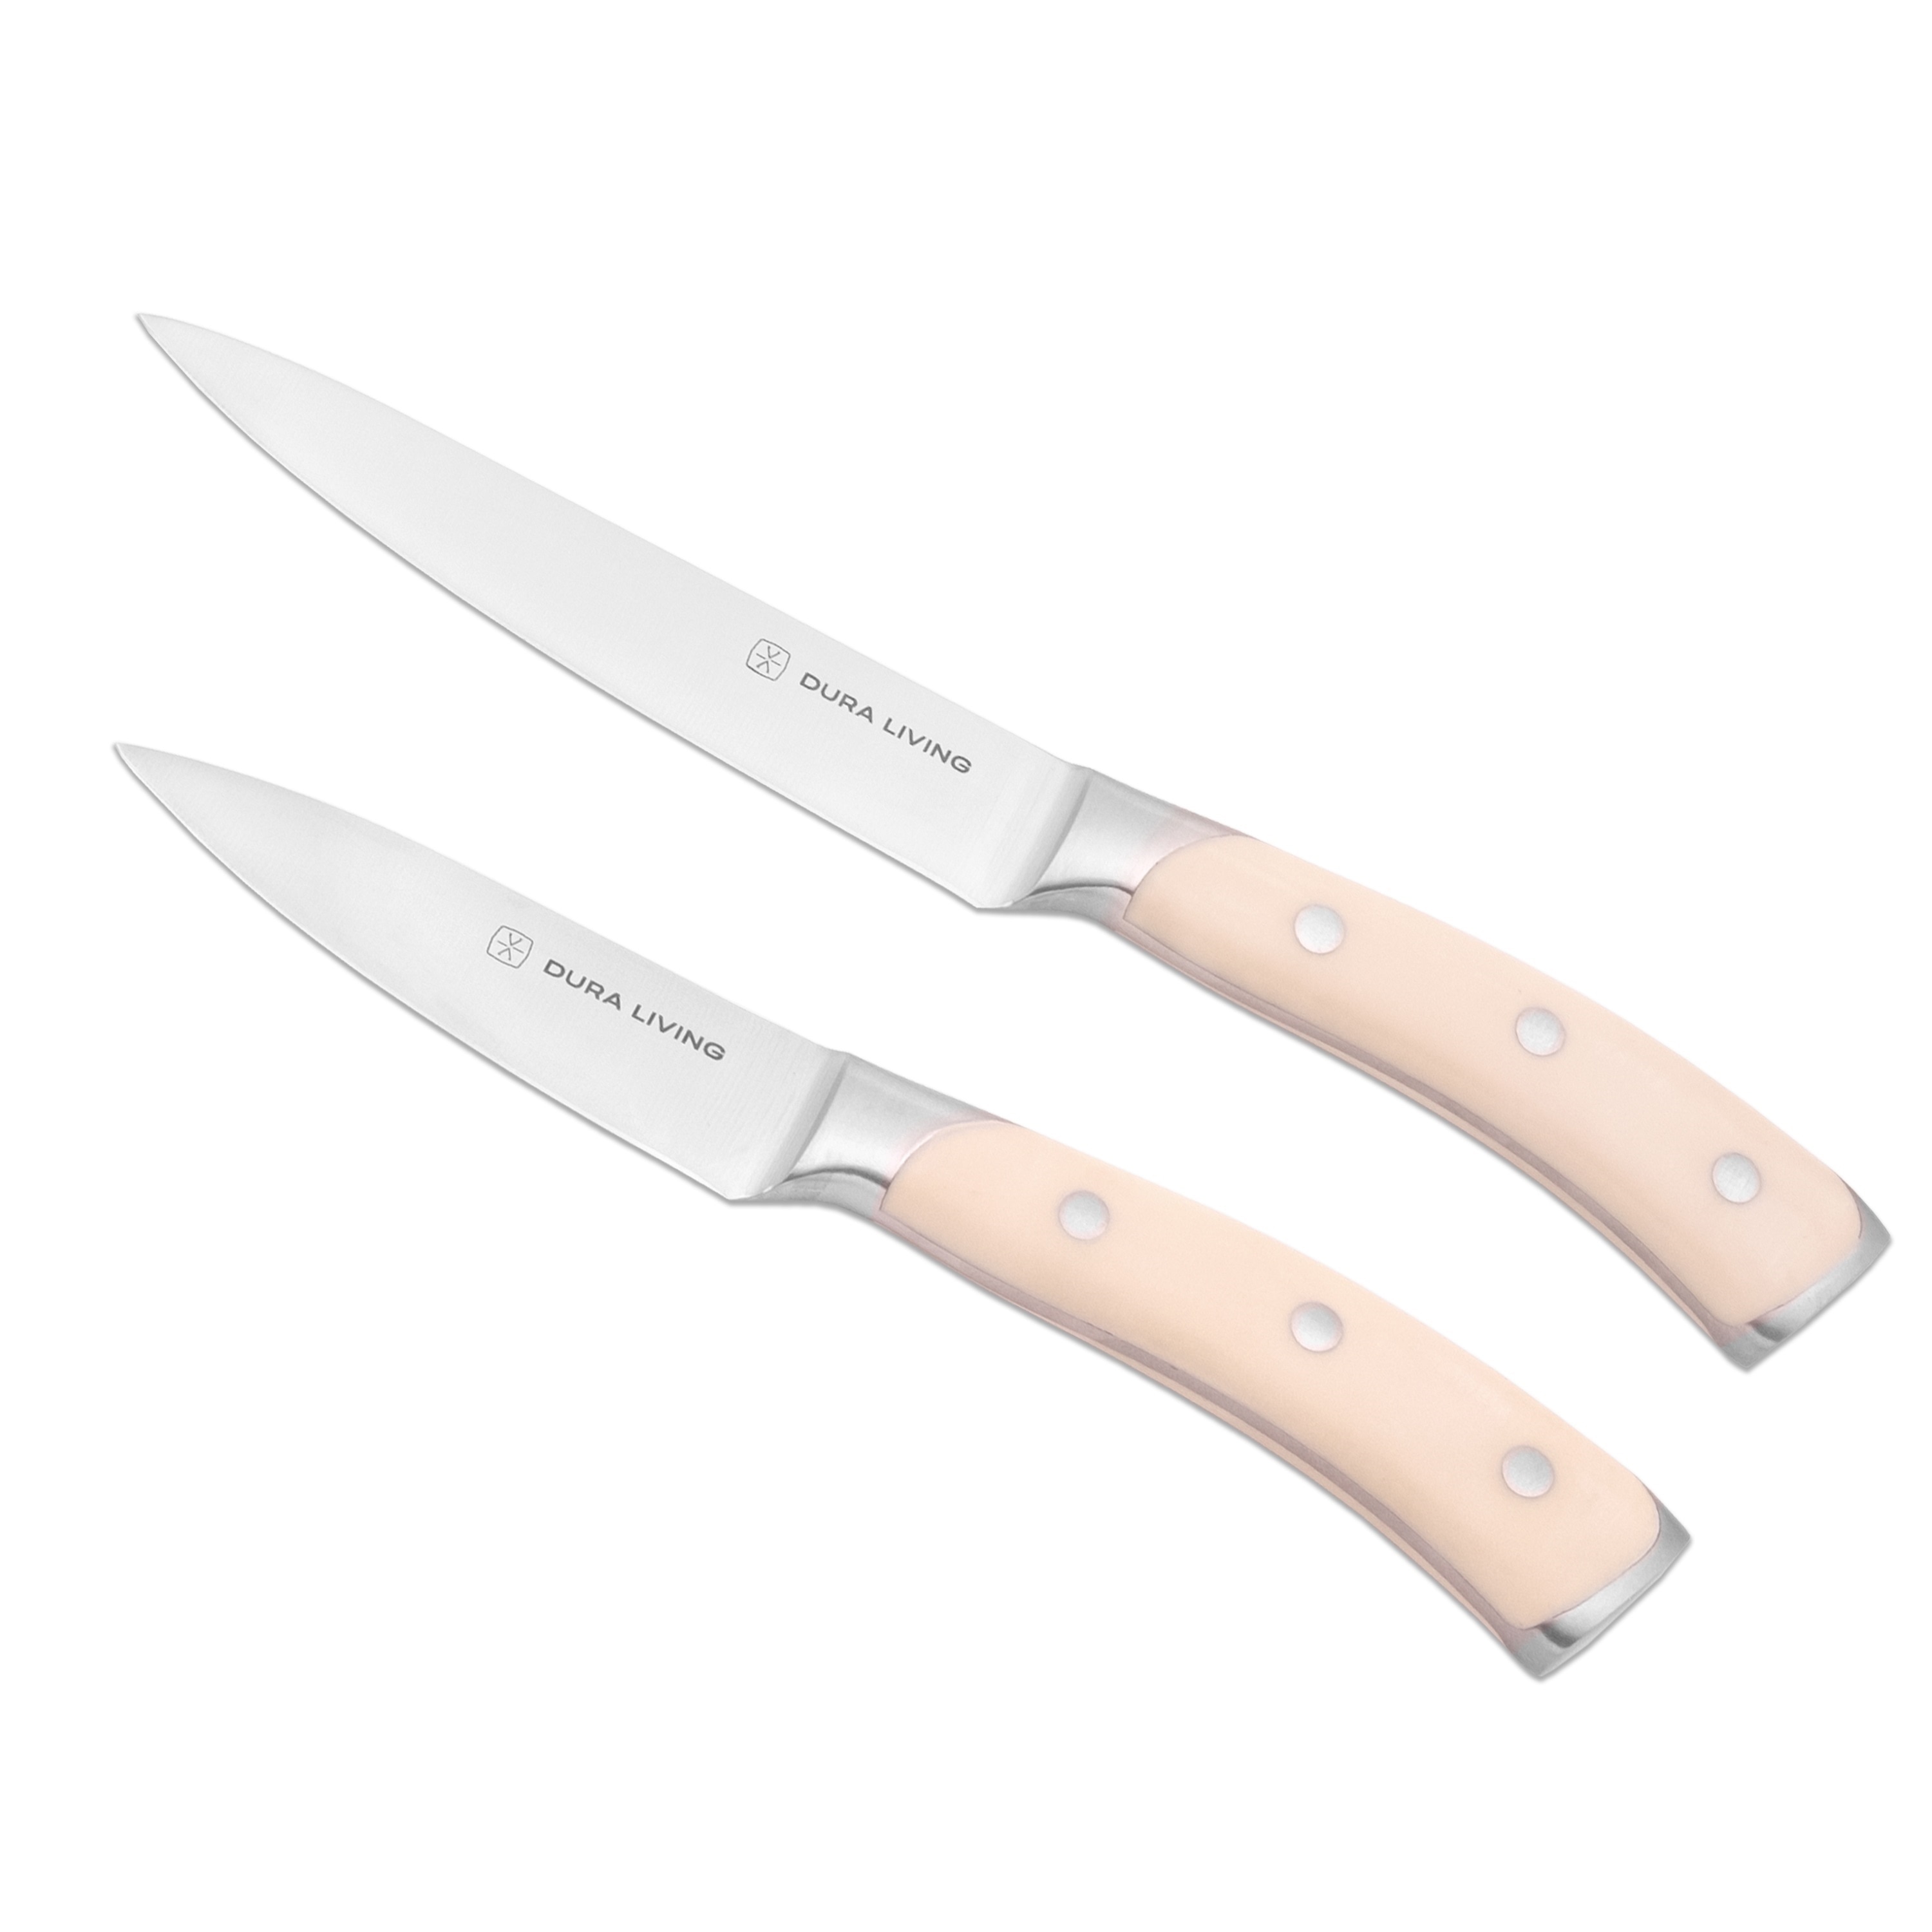 https://ak1.ostkcdn.com/images/products/is/images/direct/bb78612c0c1fd1282d78ac8a9744d04aa5078c73/Dura-Living-2-Piece-Kitchen-Knife-Set---Elite-Series-Ultra-Sharp-Forged-High-Carbon-German-Stainless-Steel-Cooking-Knives%2C-Cream.jpg